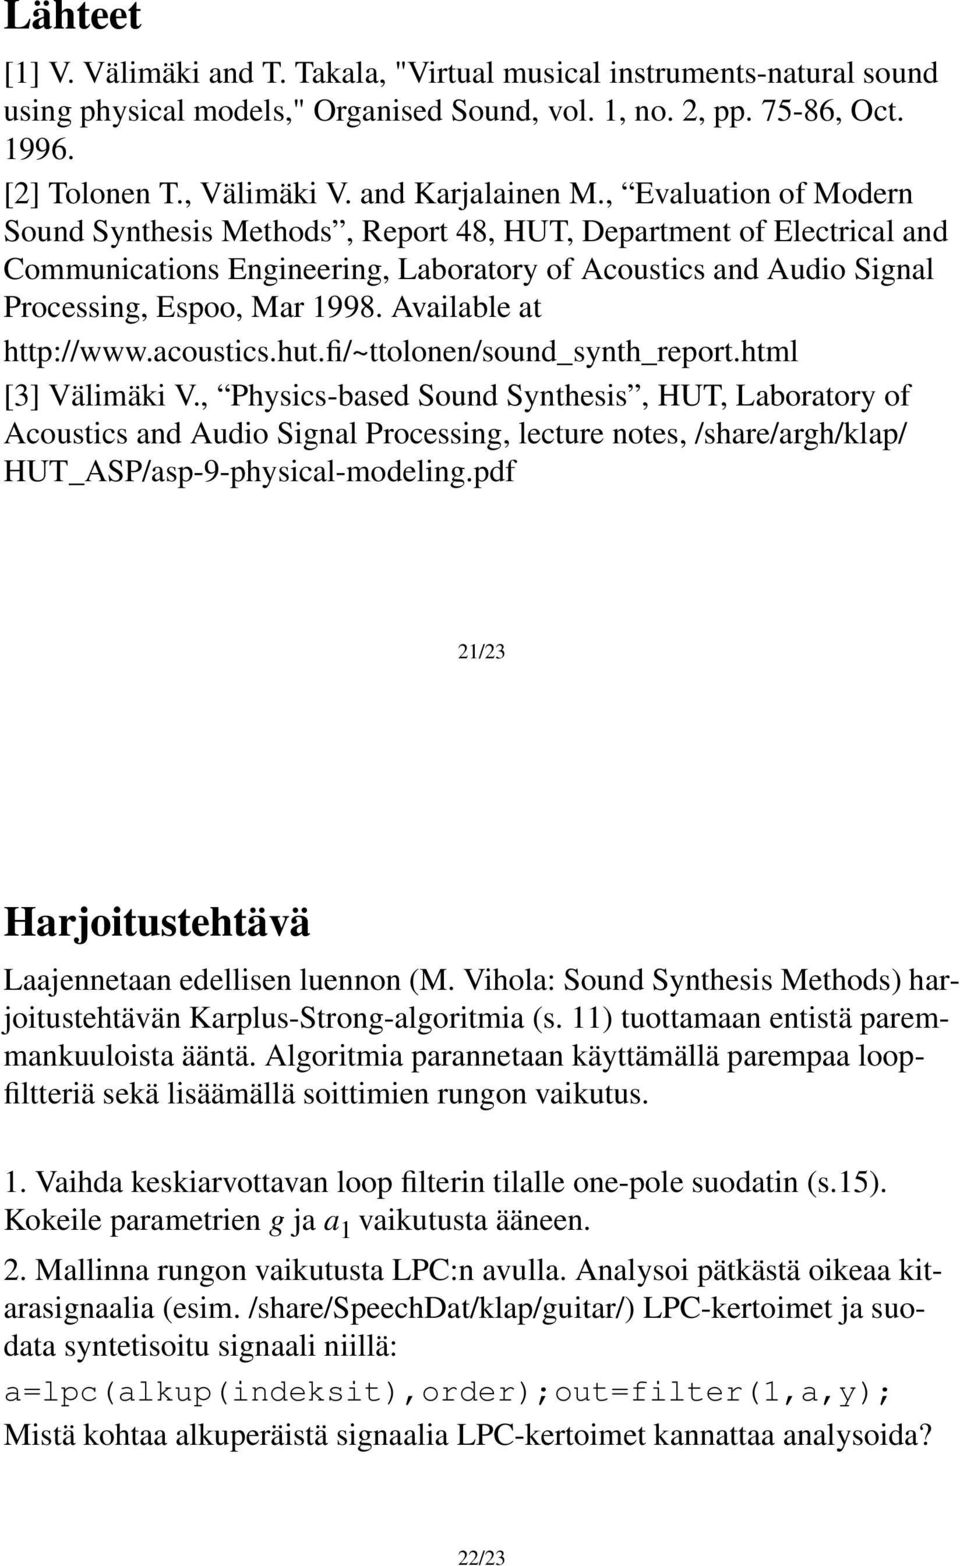 , Evaluation of Modern Sound Synthesis Methods, Report 48, HUT, Department of Electrical and Communications Engineering, Laboratory of Acoustics and Audio Signal Processing, Espoo, Mar 1998.